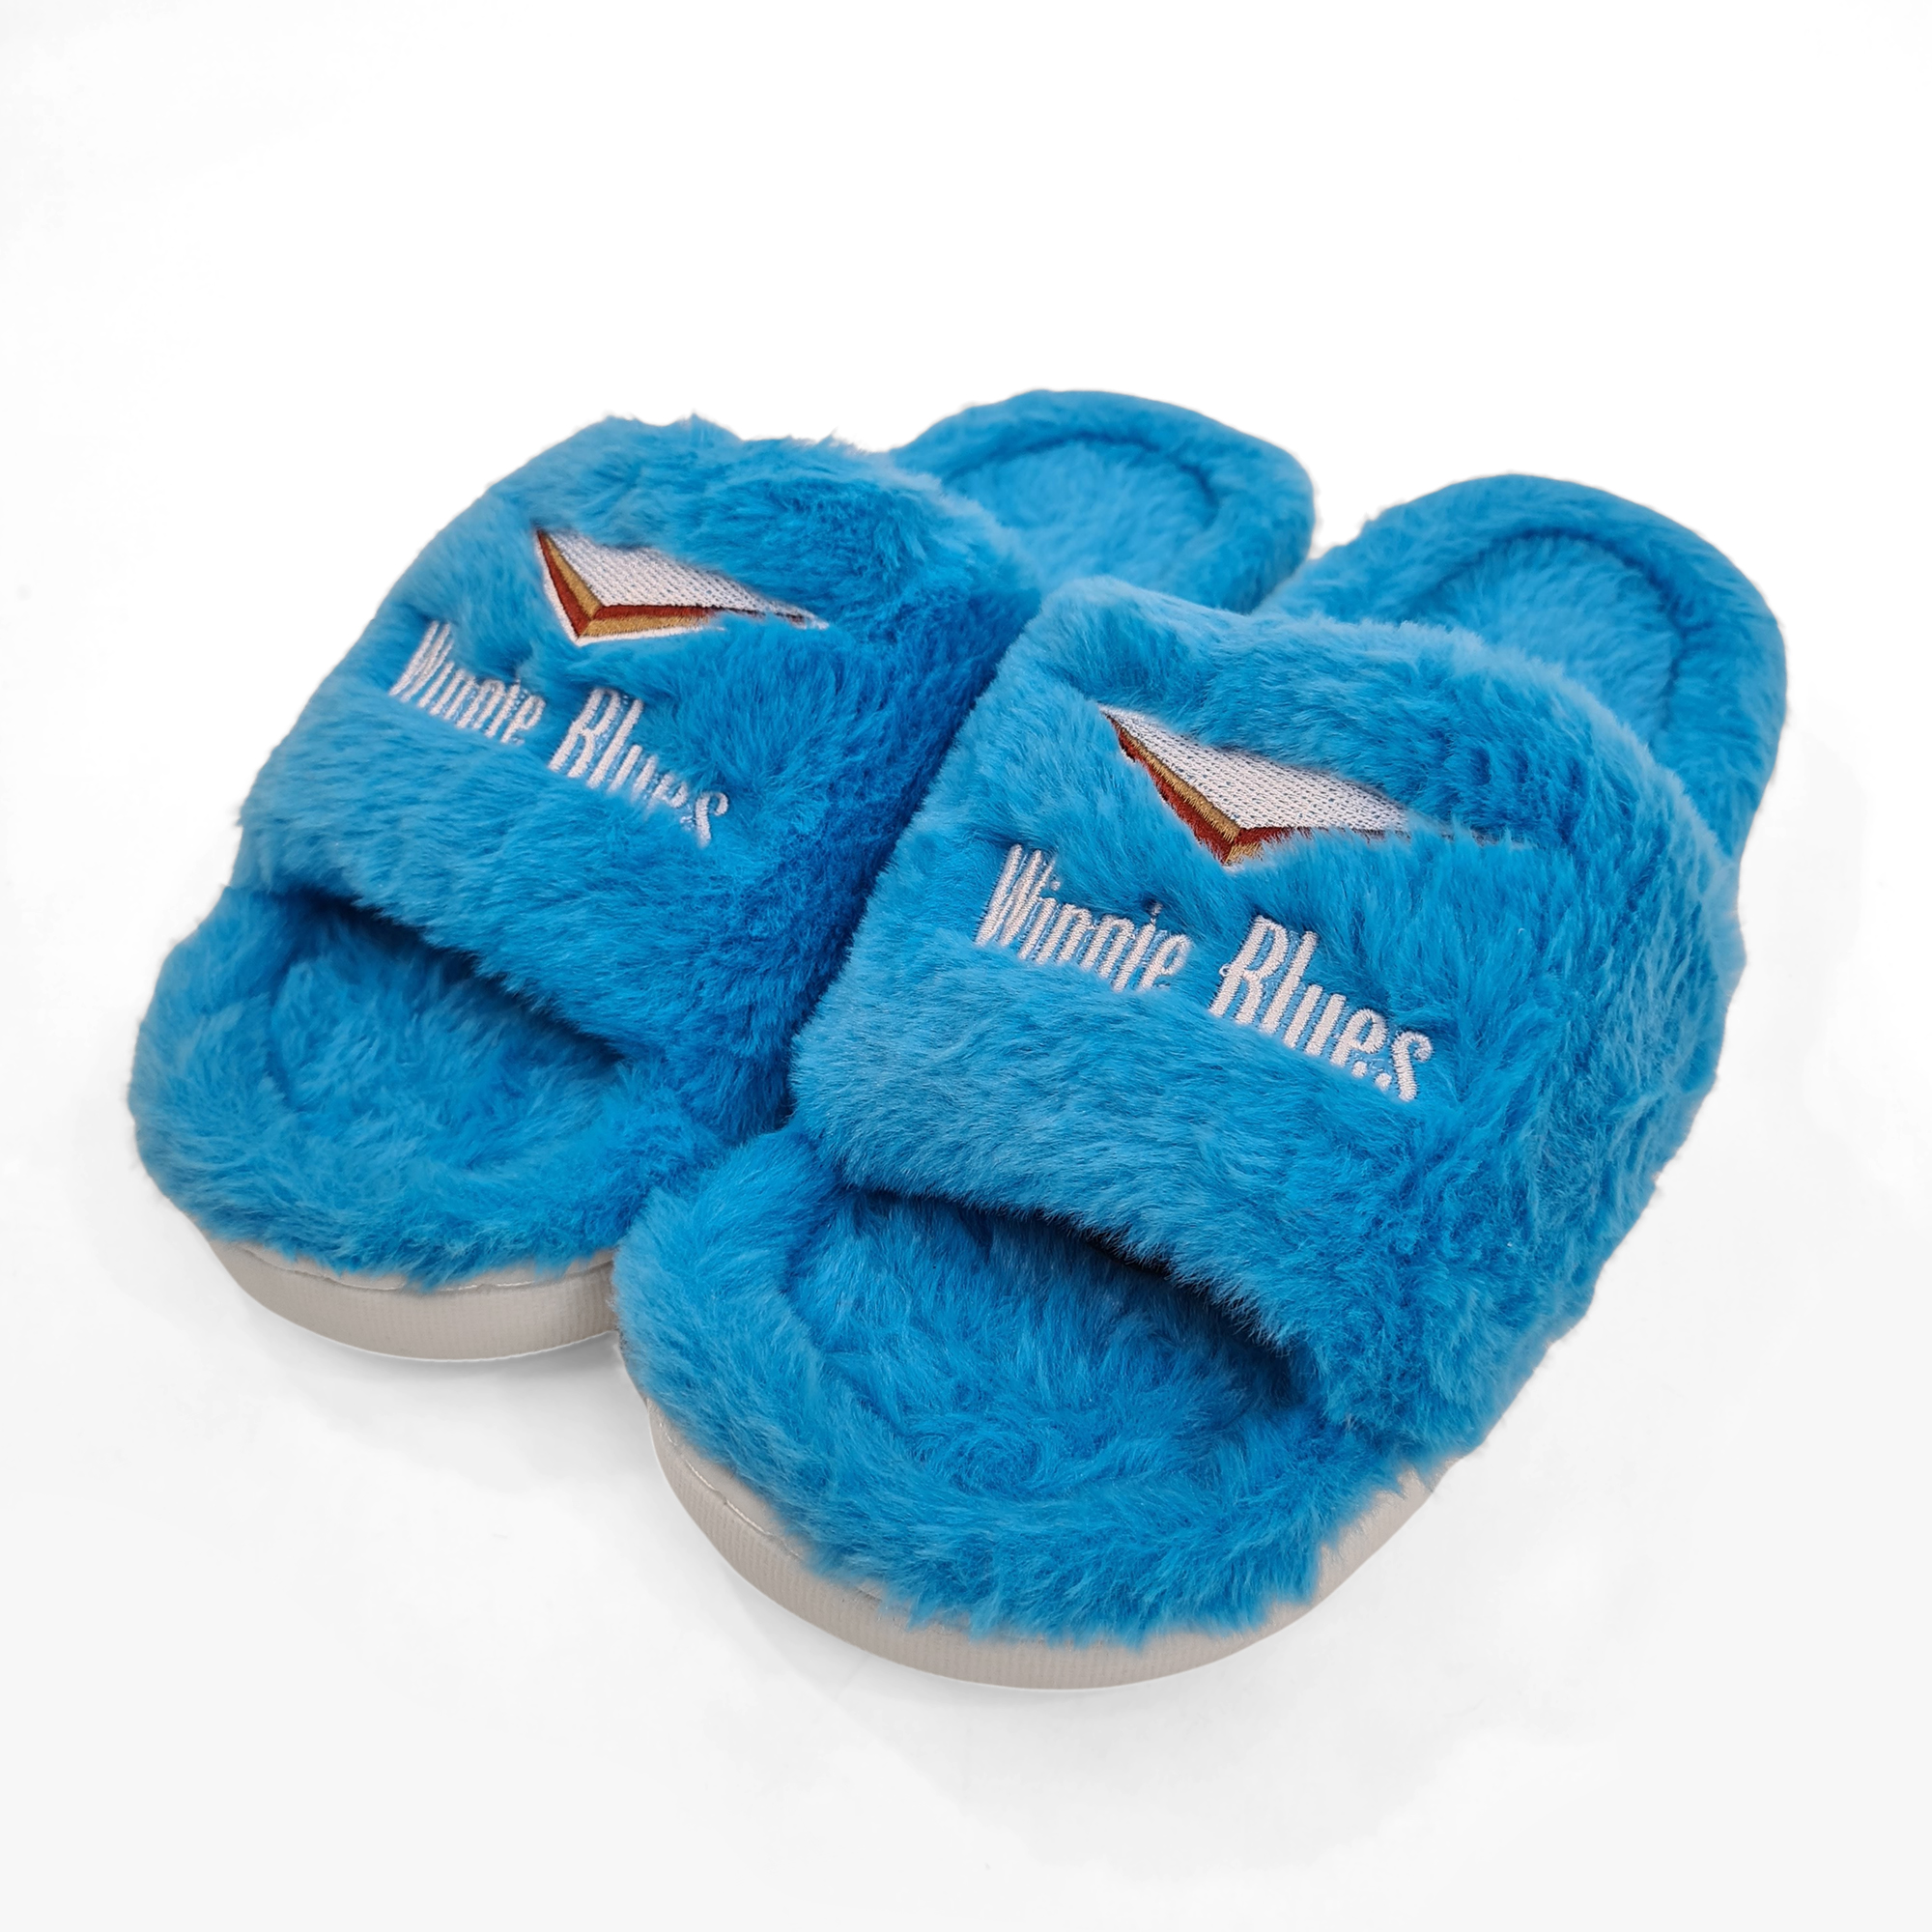 2 FOR $50 SLIPPERS